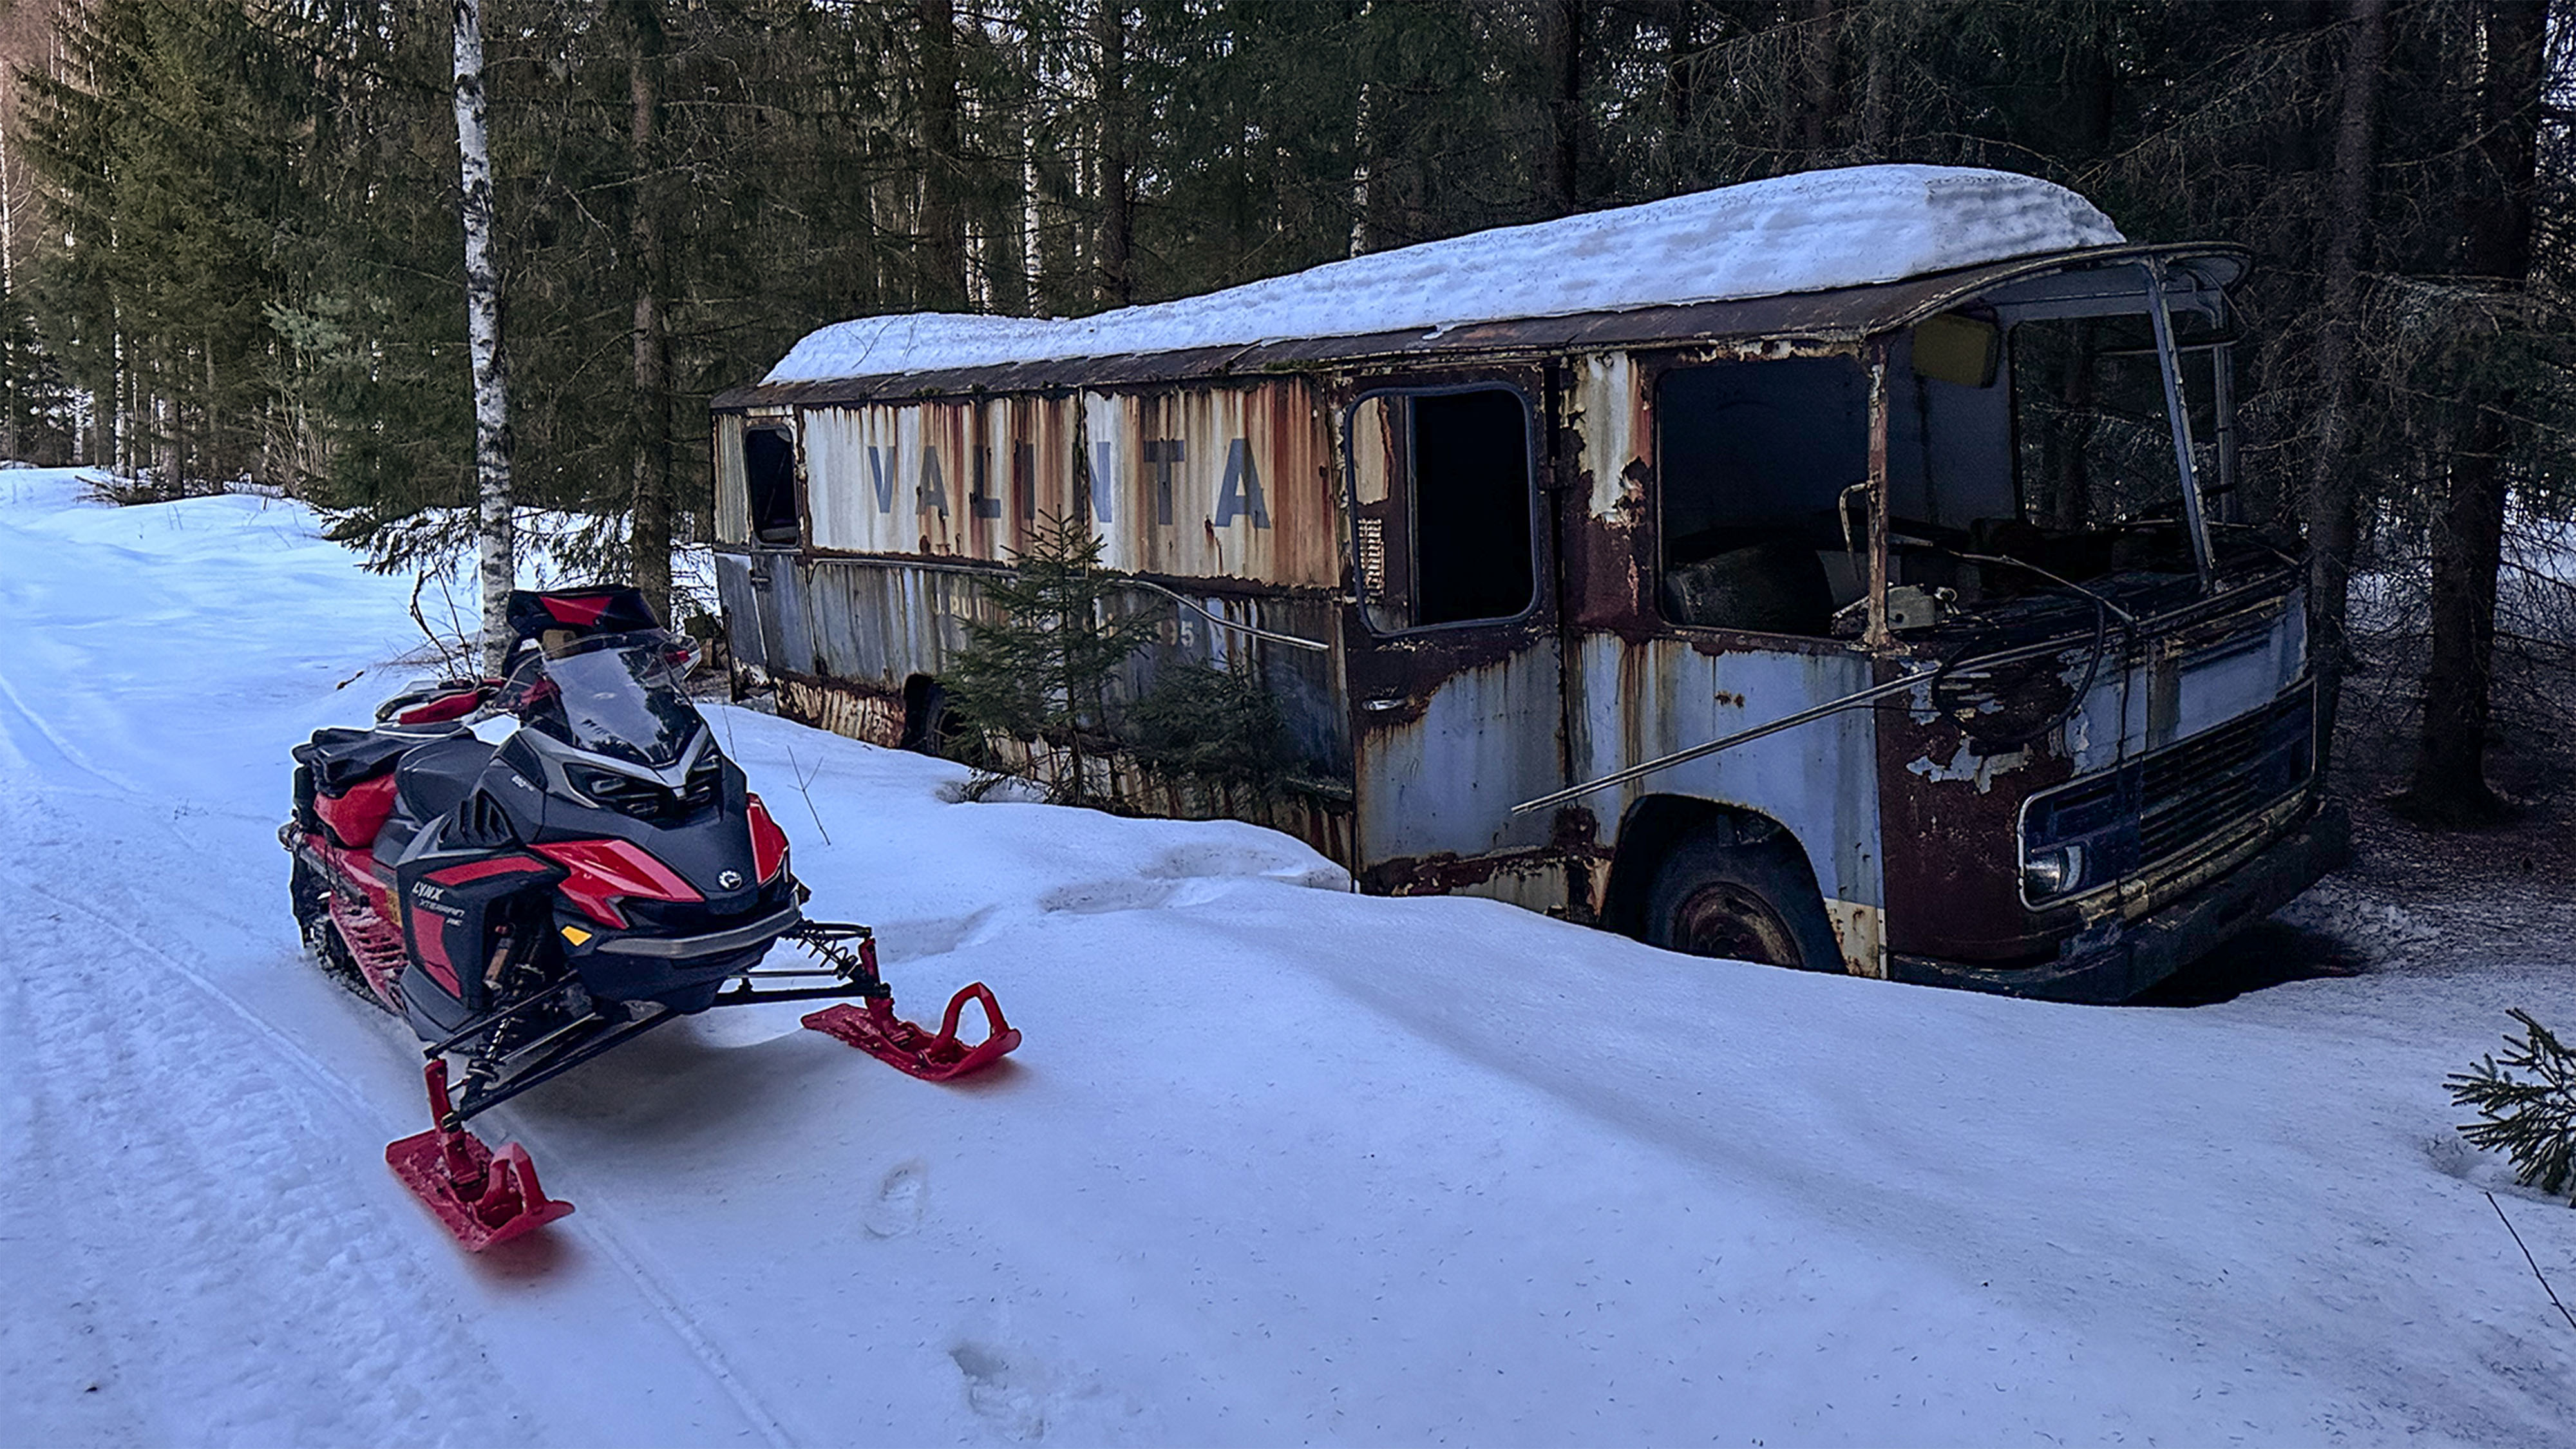 Lynx Xterrain RE 850 E-TEC crossover snowmobile parked next to a rusted bus